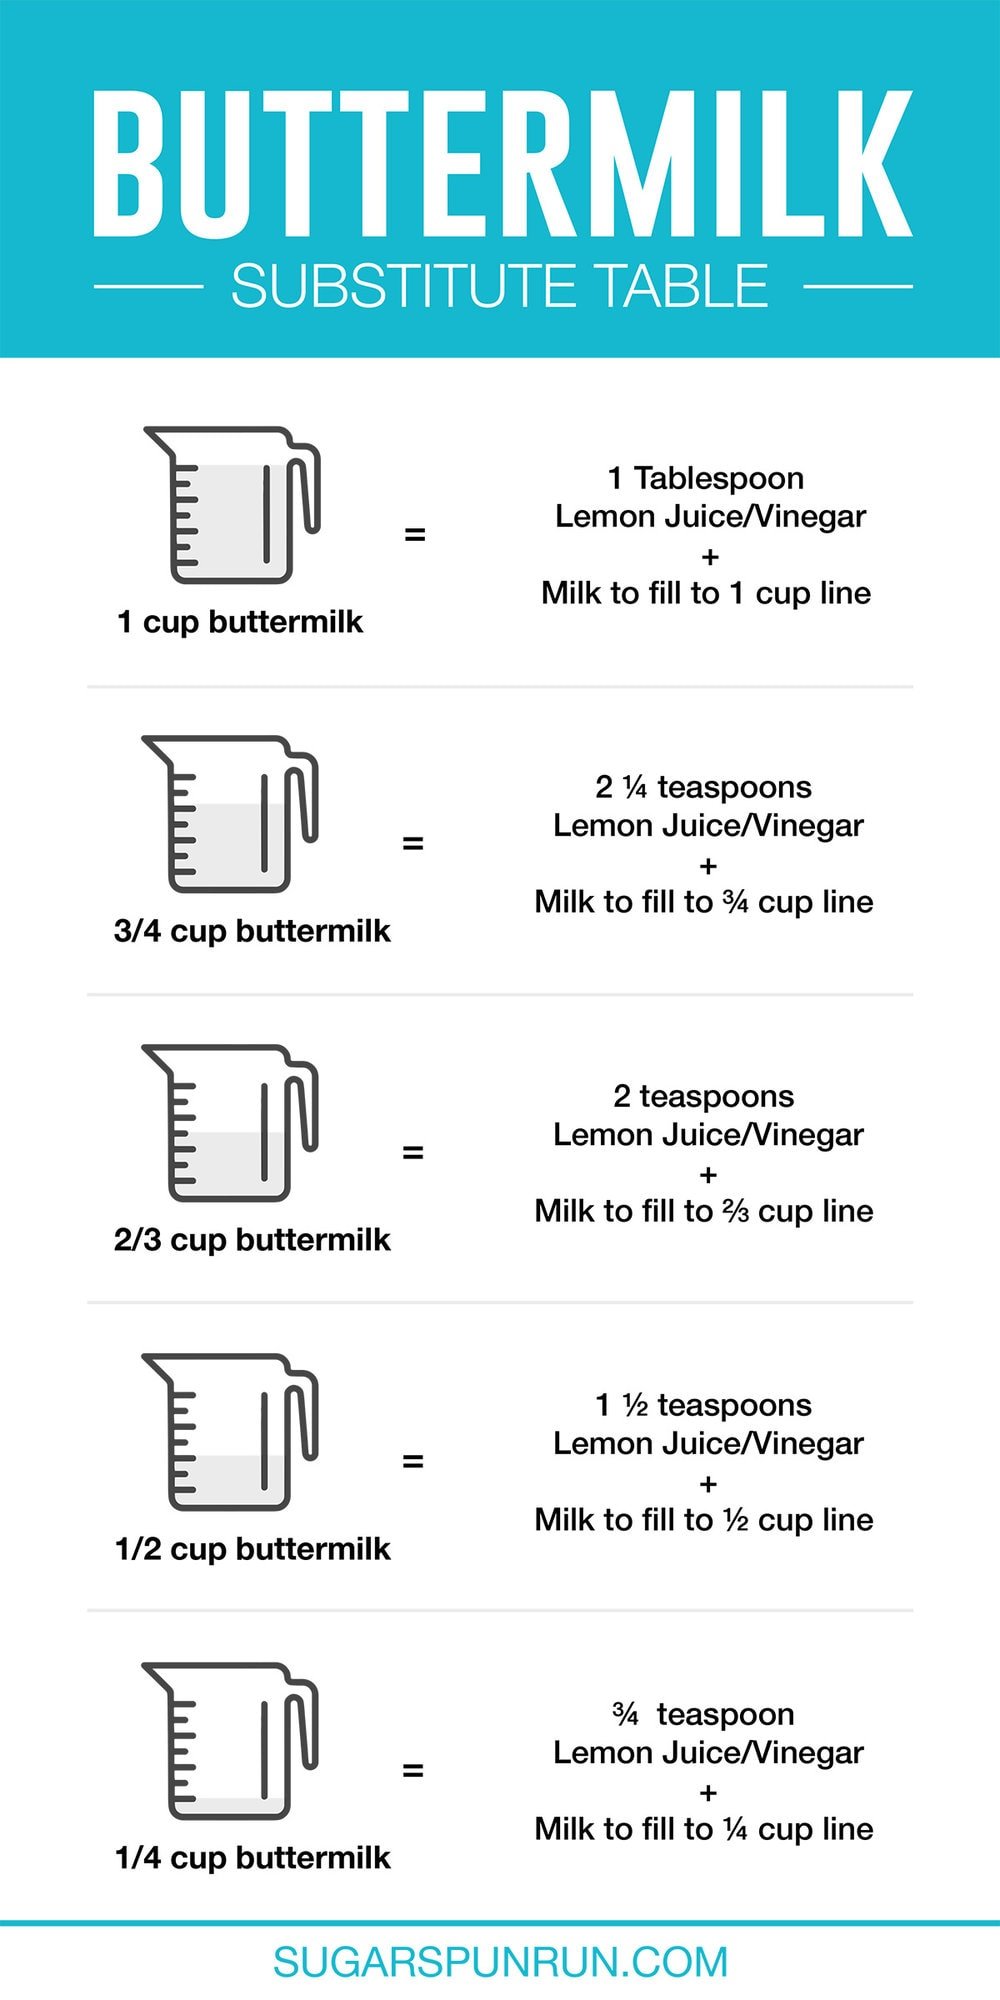 buttermilk substitute table with graphics and measurements